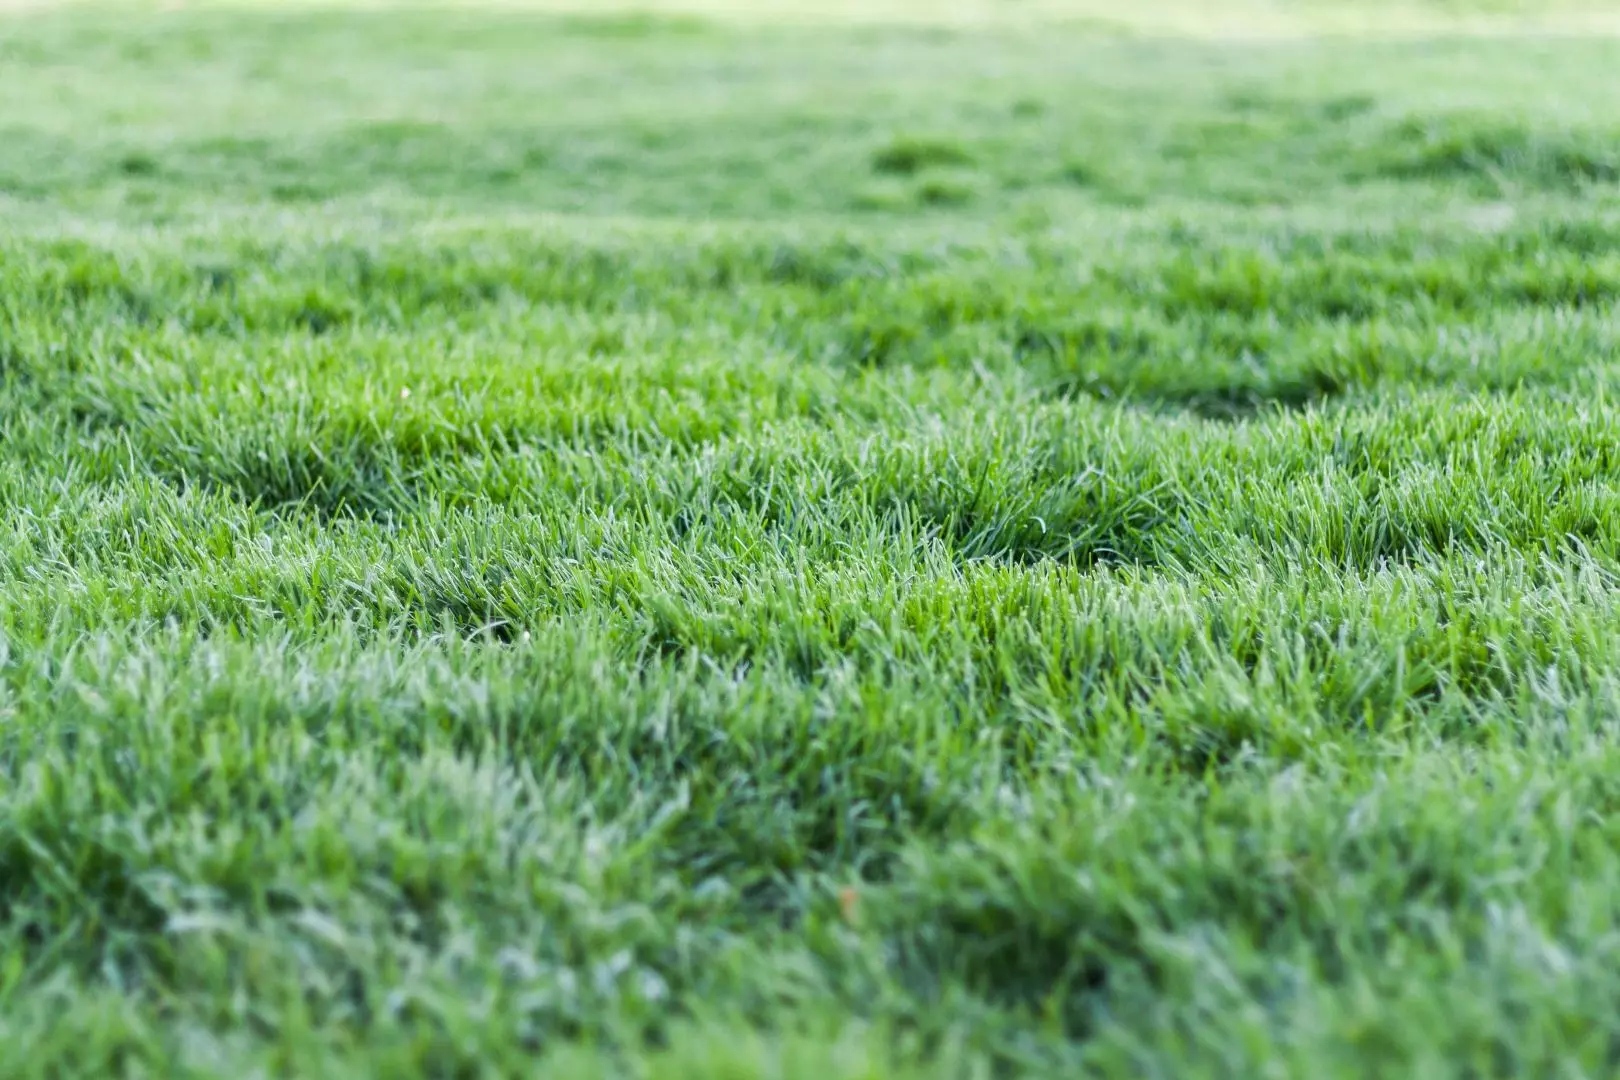 Lawn Maintenance in Maidstone and Kent | Turfing and Lawn Care